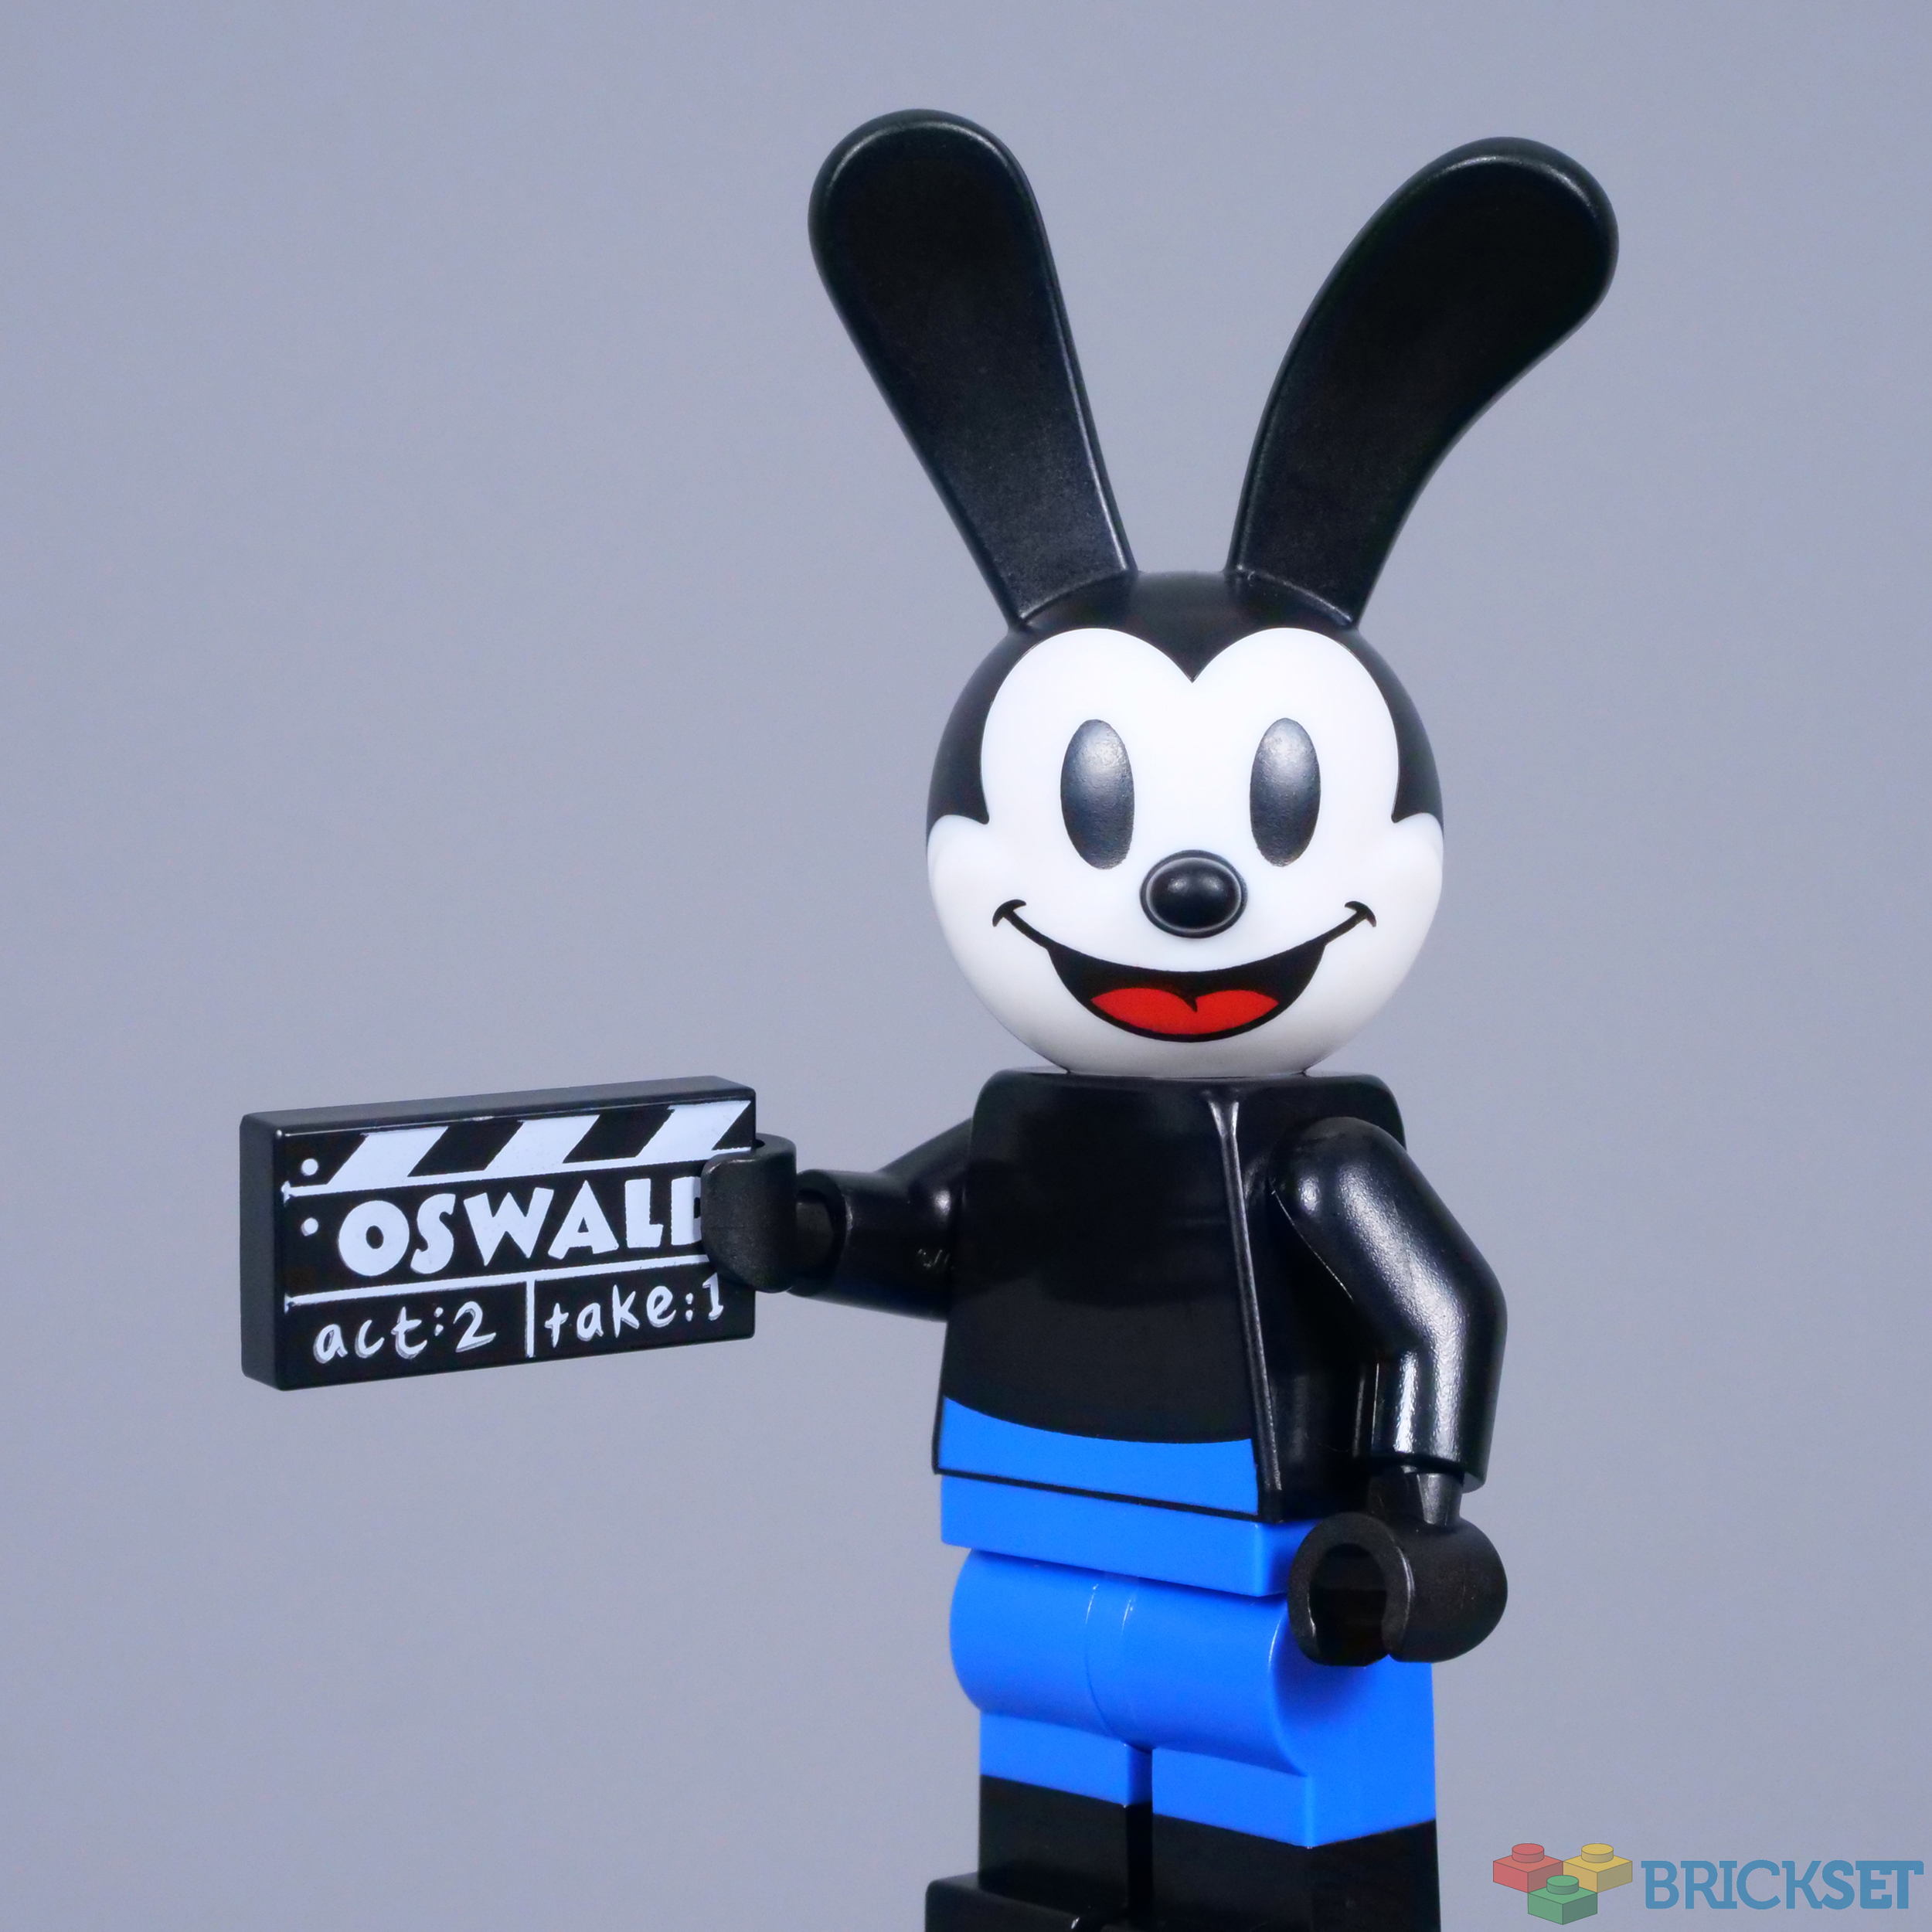 LEGO 71038 Disney 100 launches 18 new minifigures to collect